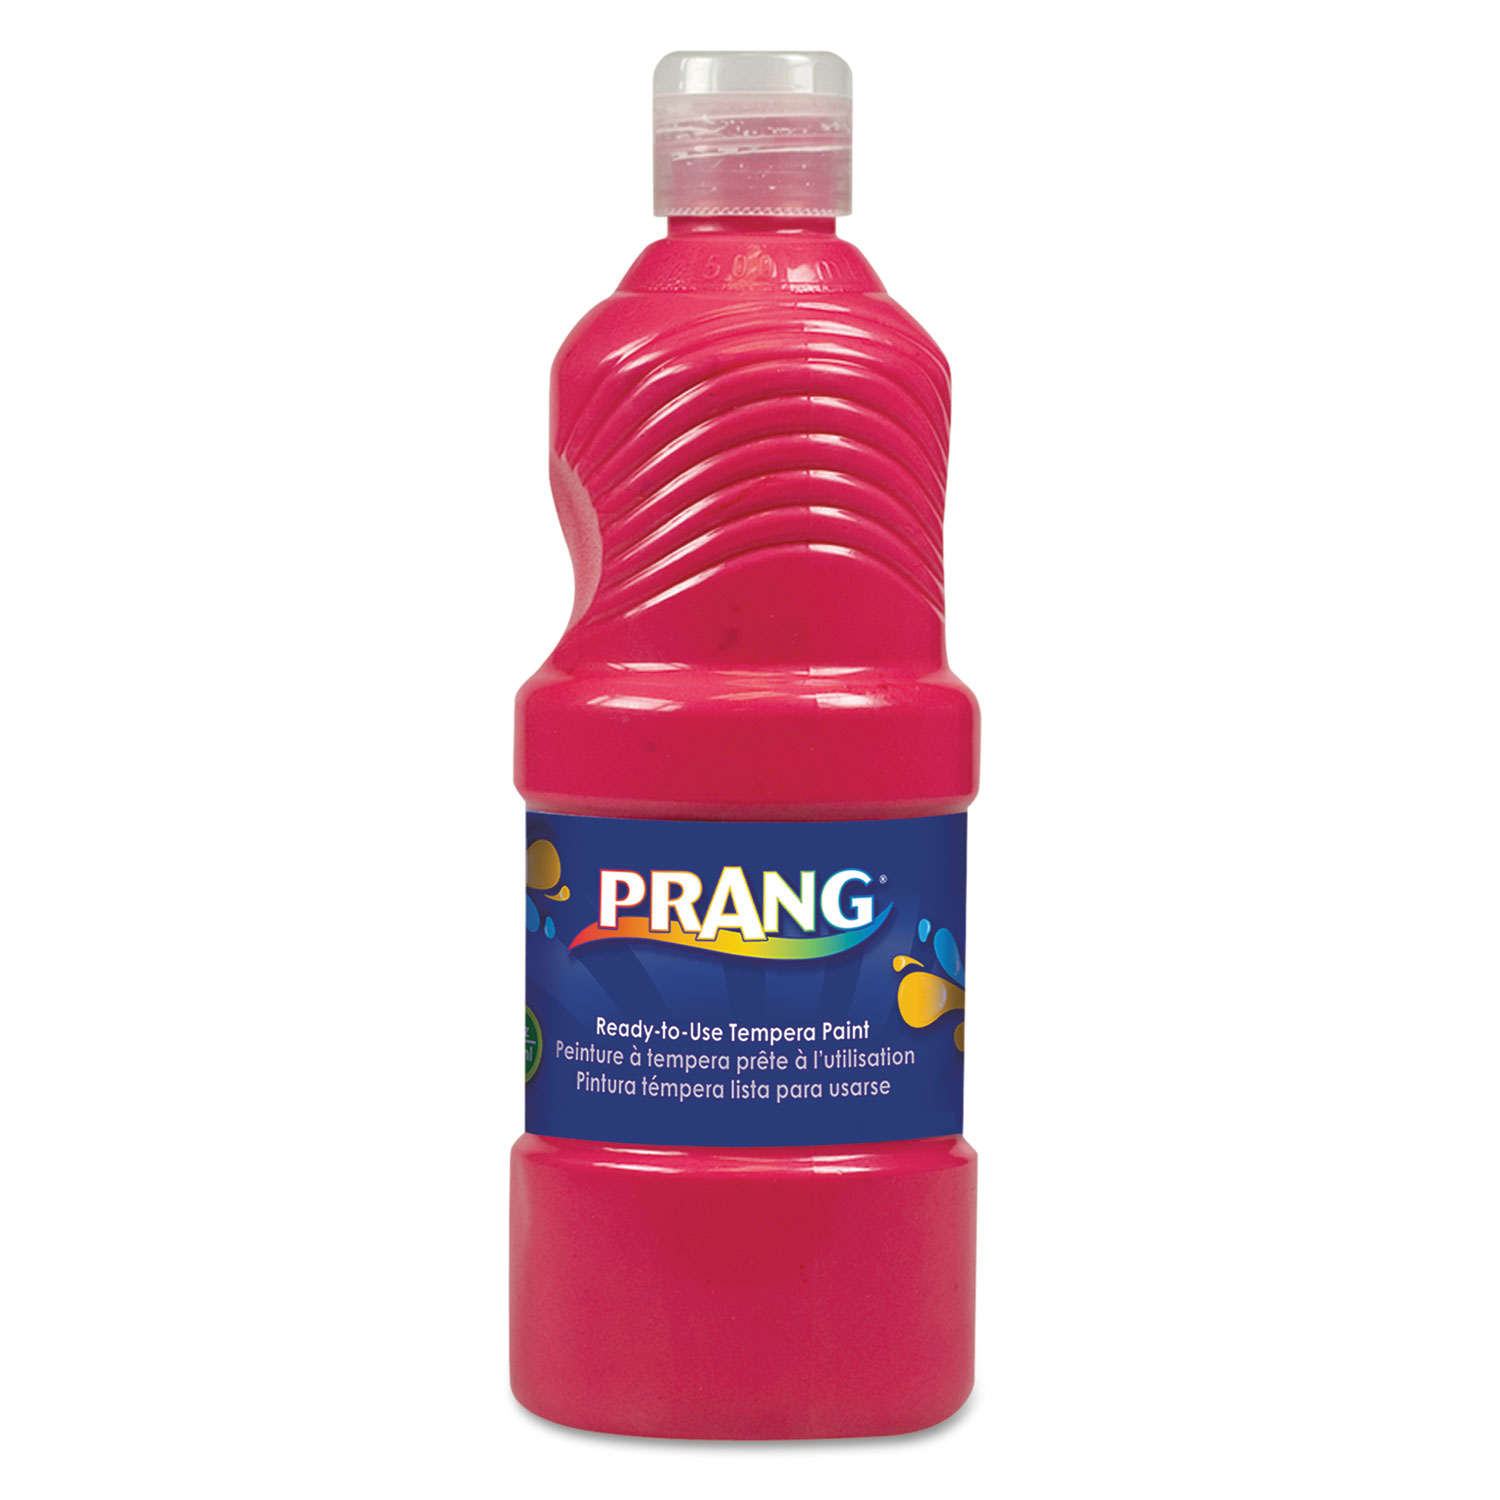  Prang 21601 Ready-to-Use Tempera Paint, Red, 16 oz (DIX21601) 